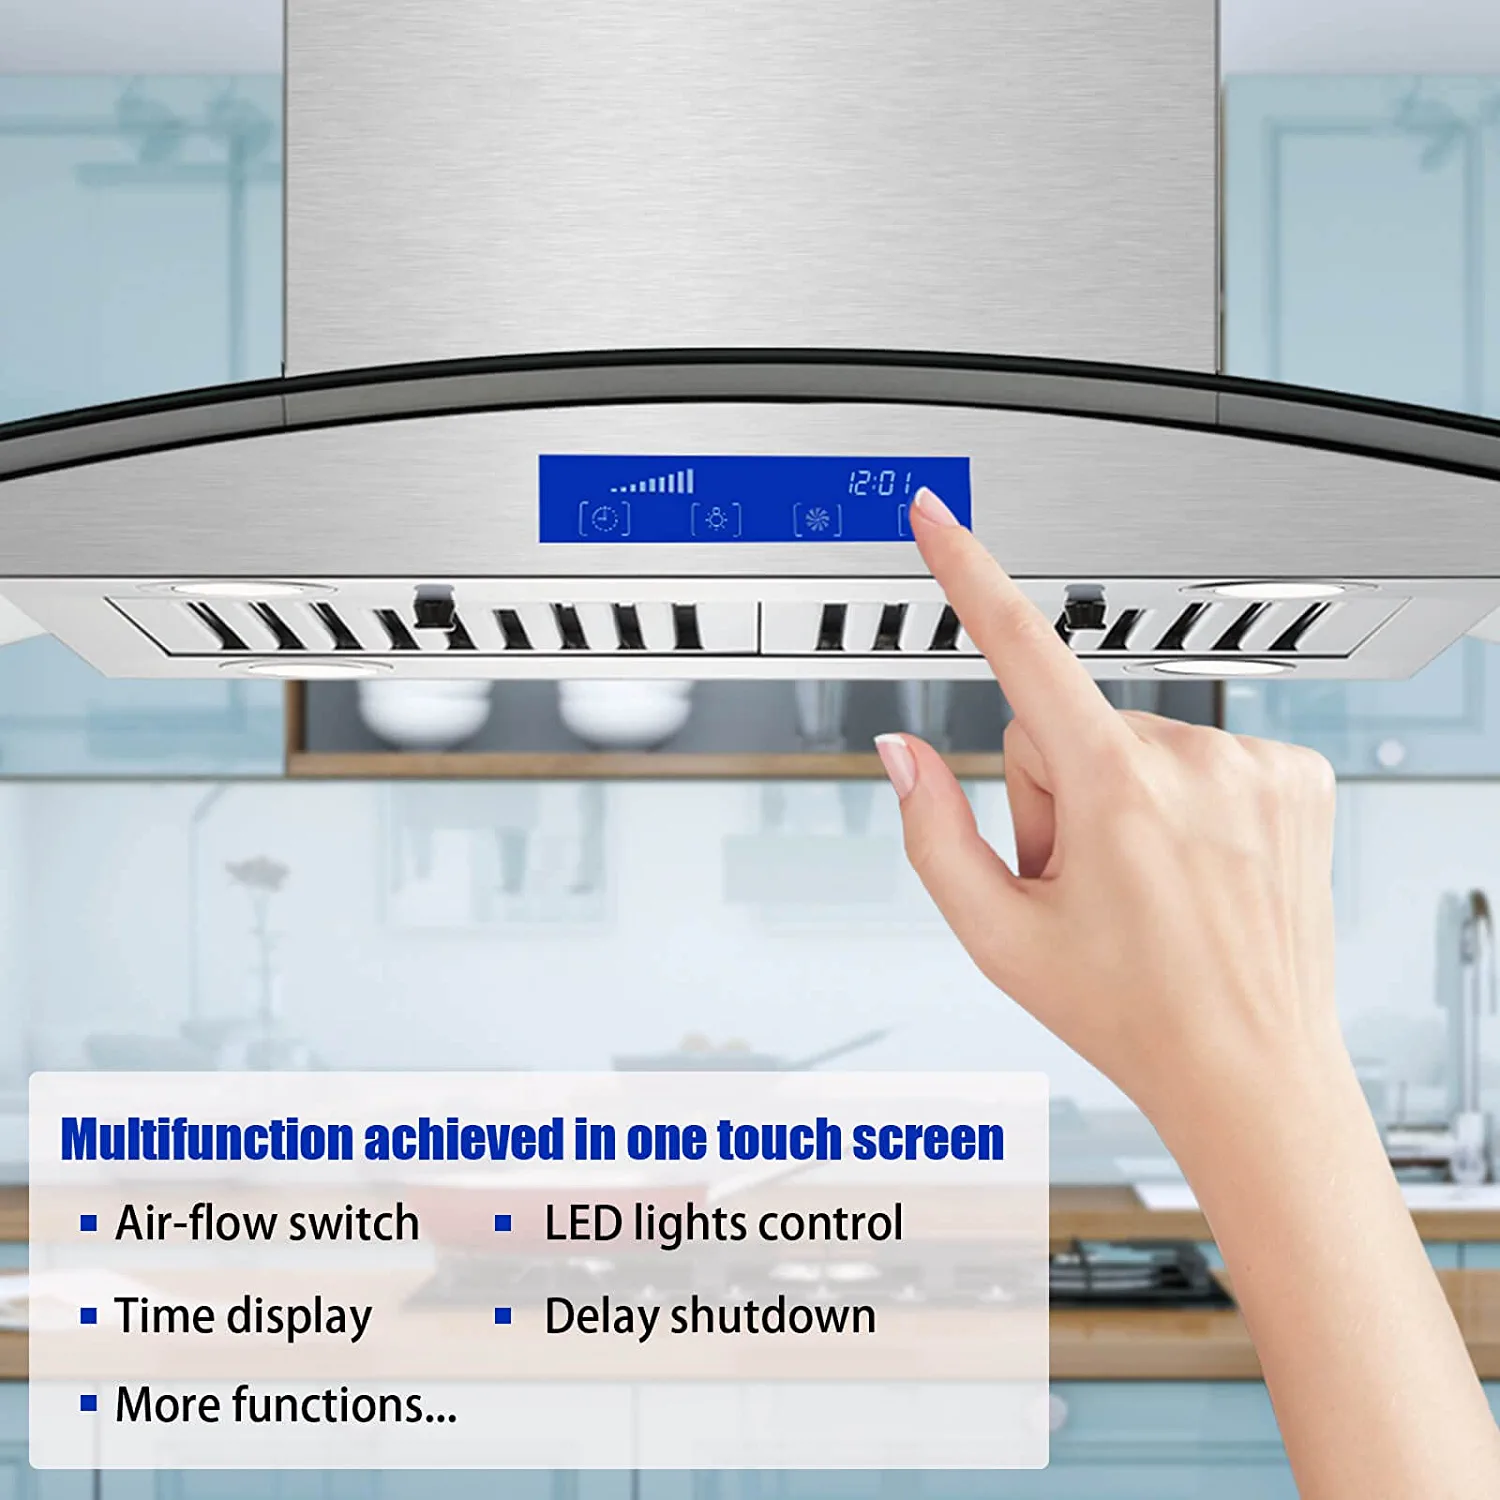 Dropship 30 Inch Range Hood 700CFM Wall Mount Stainless Steel Touch Control  3-speed Stove Vent to Sell Online at a Lower Price